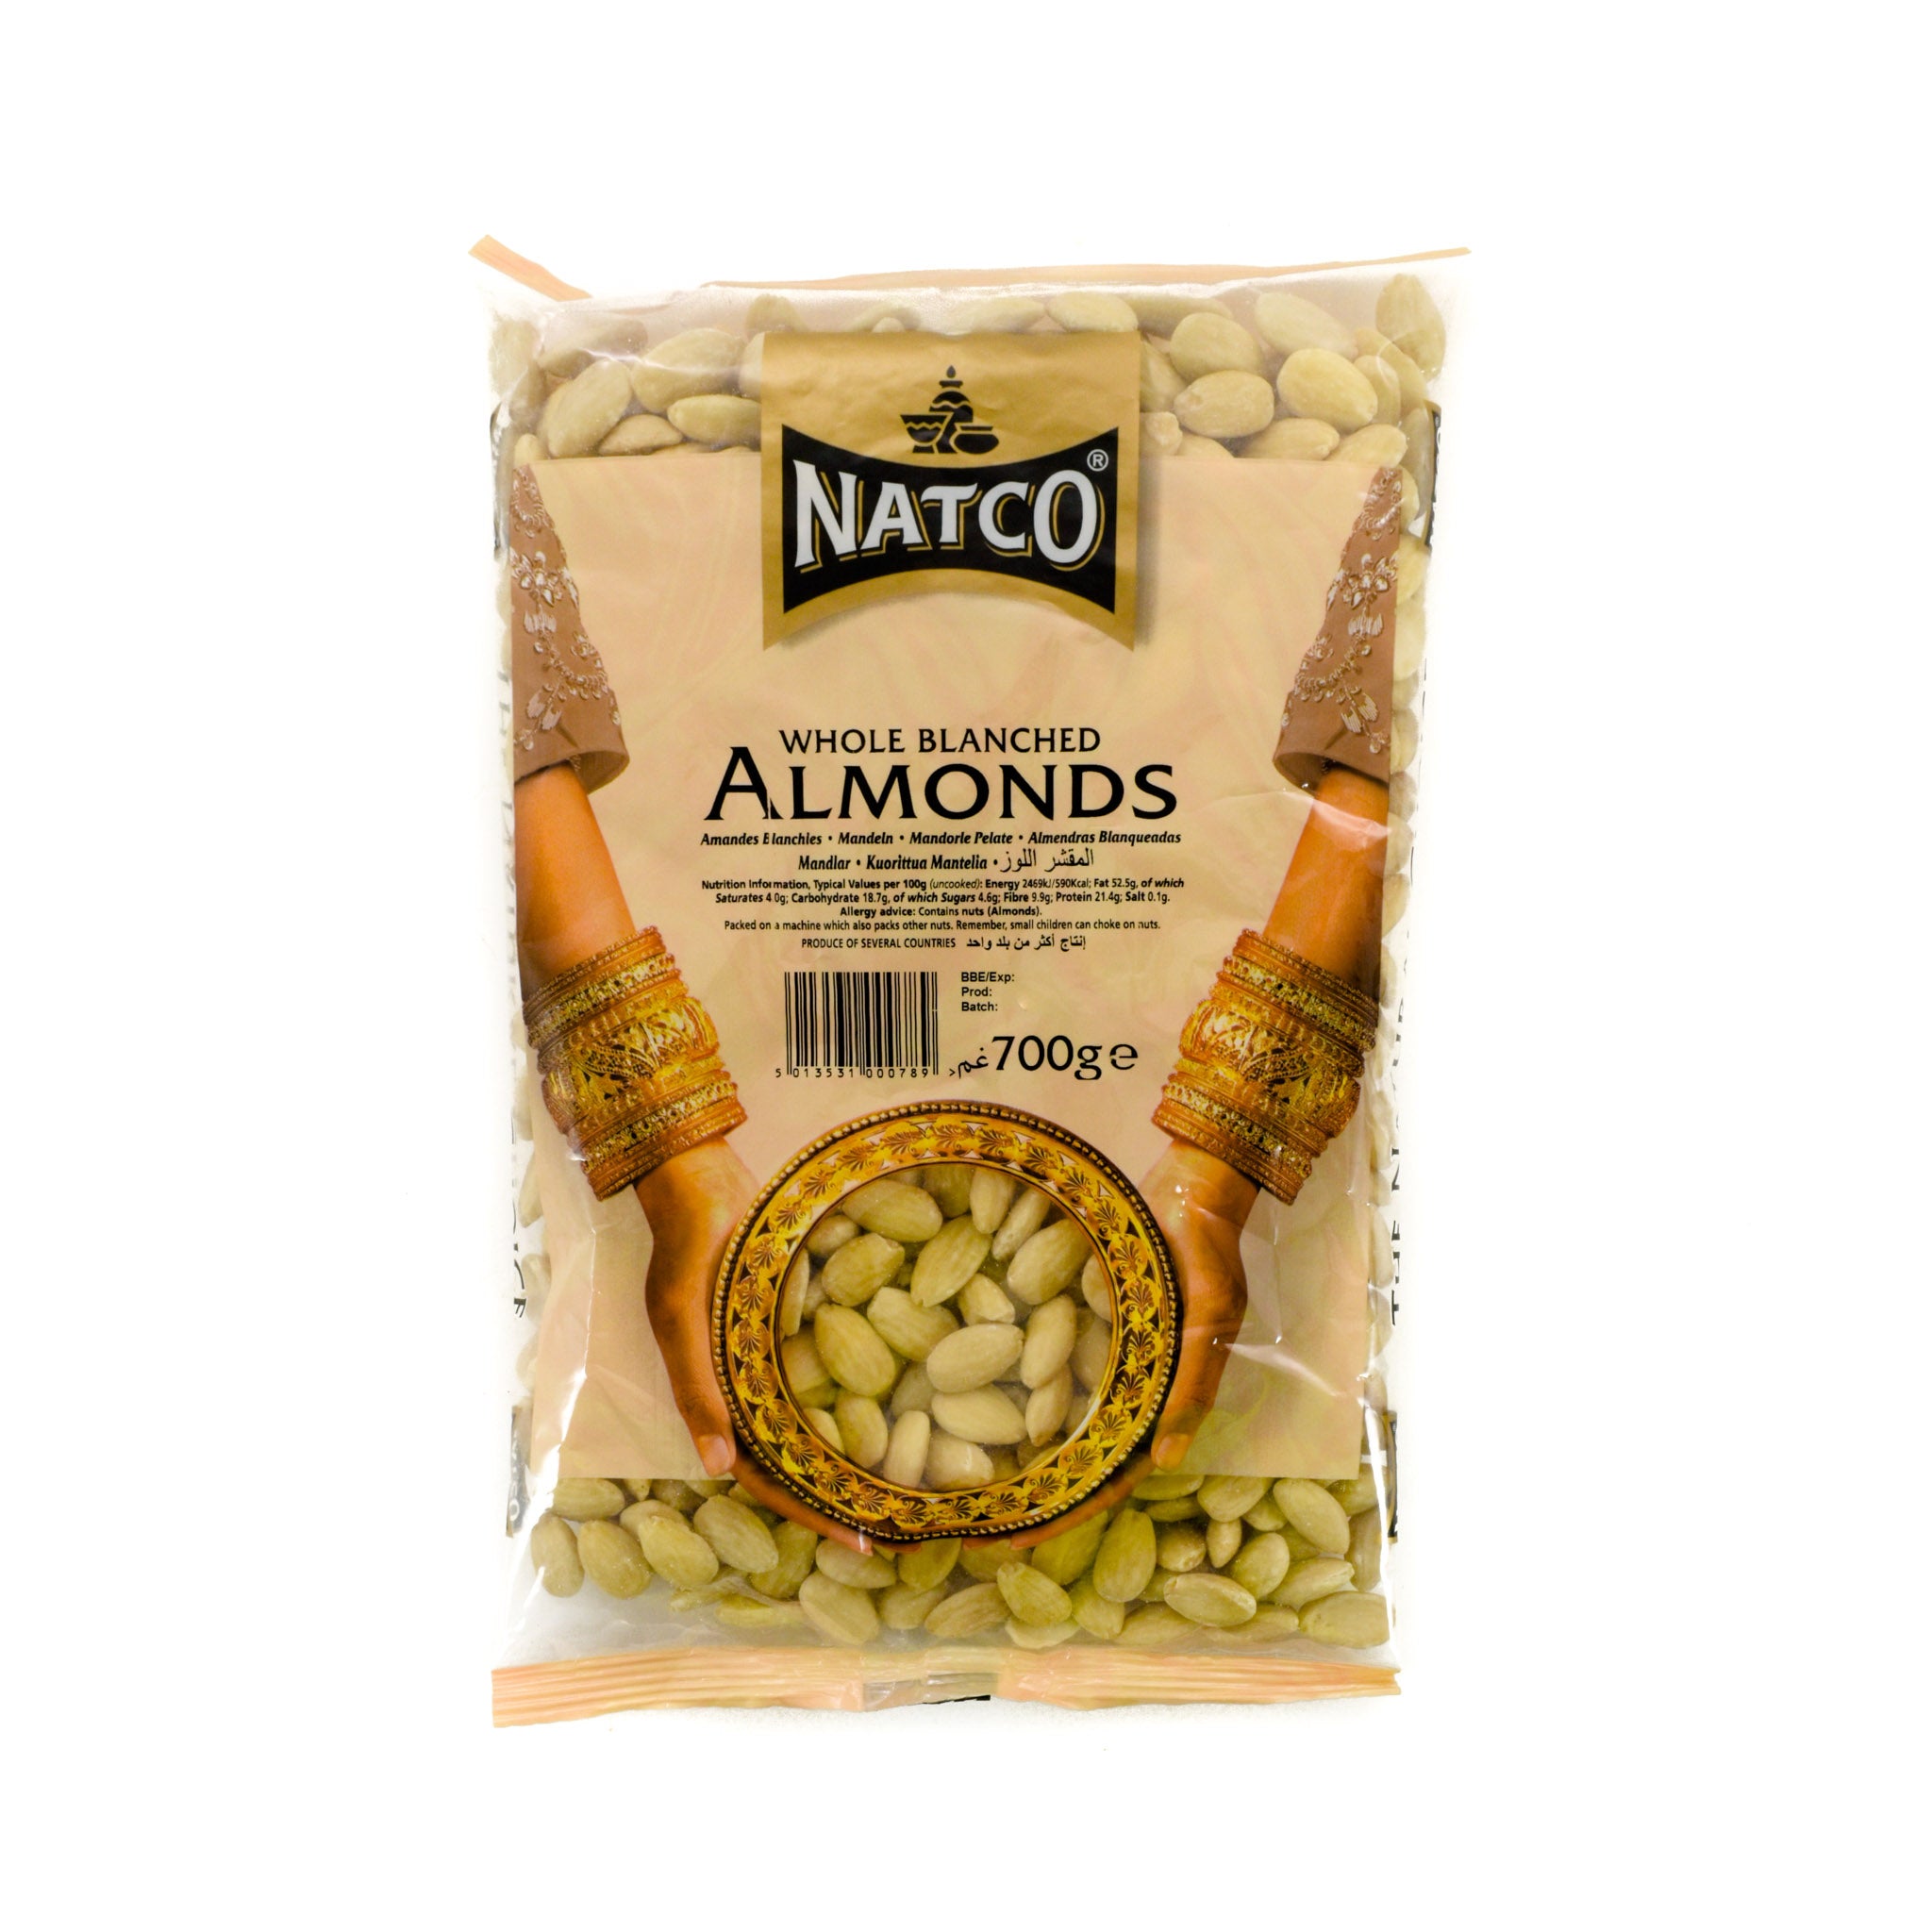 Natco Blanched Whole Almonds 700g